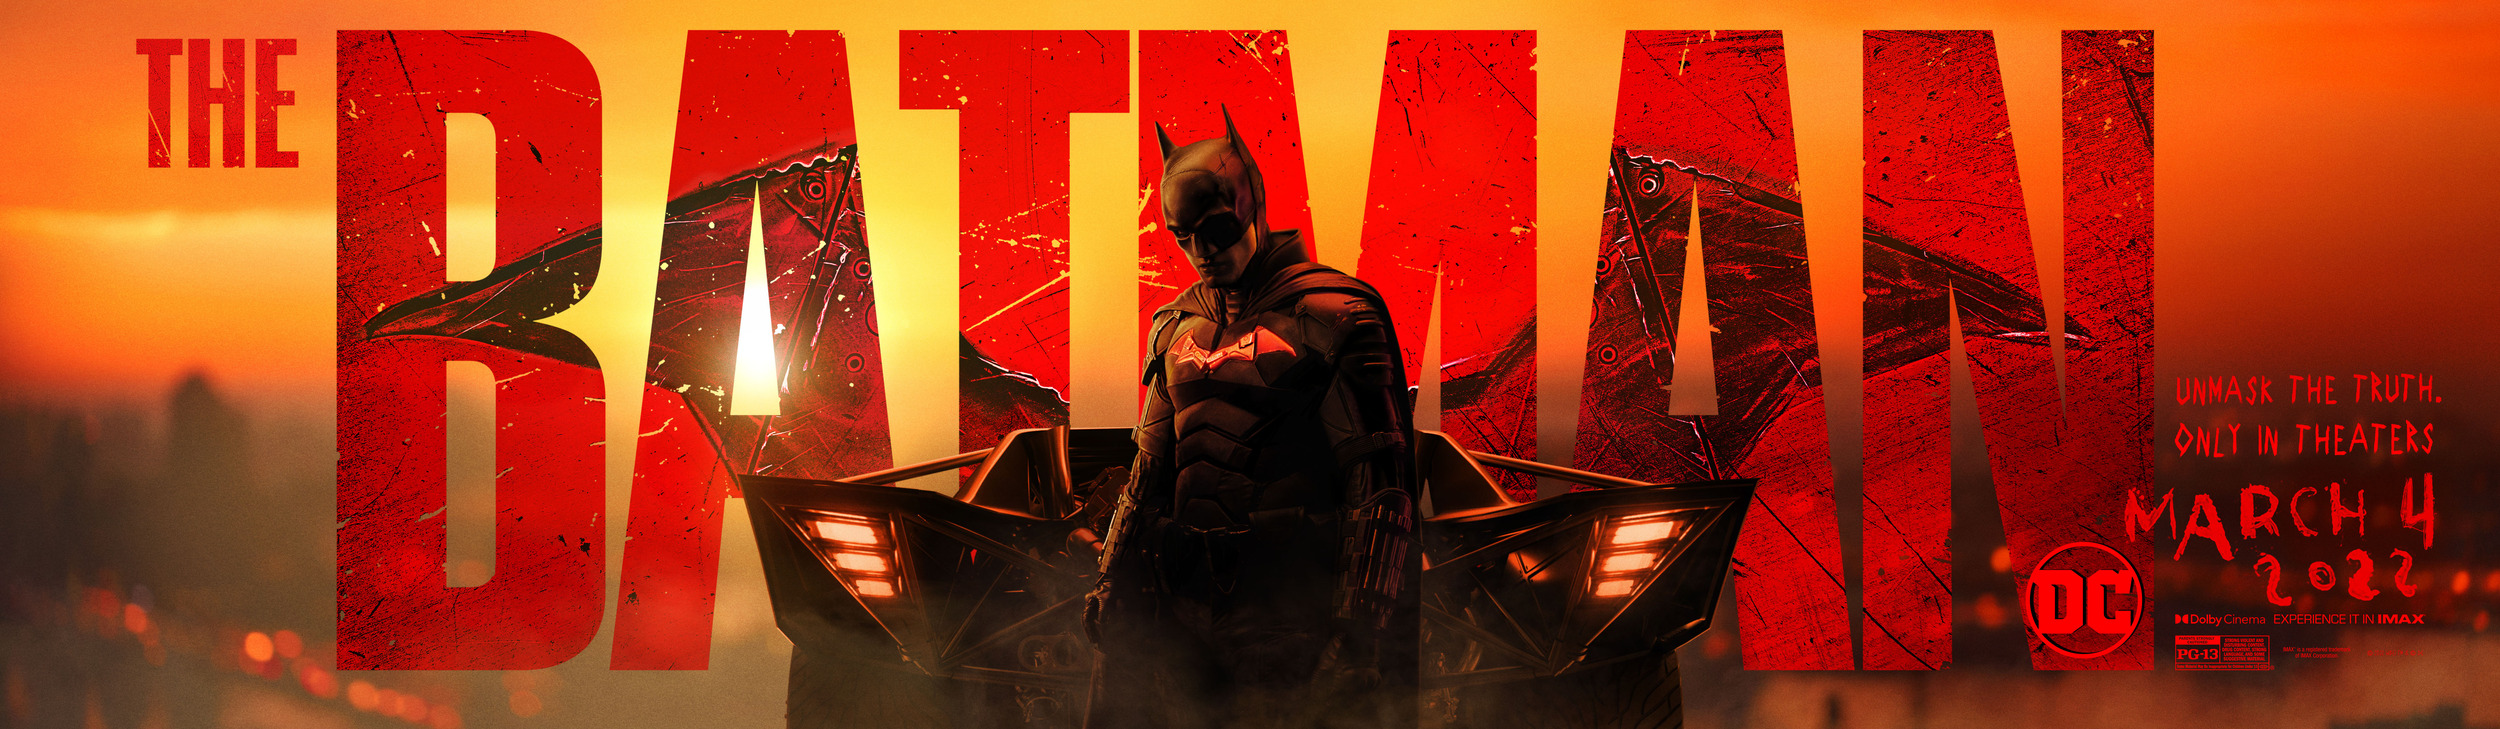 Mega Sized Movie Poster Image for The Batman (#26 of 32)